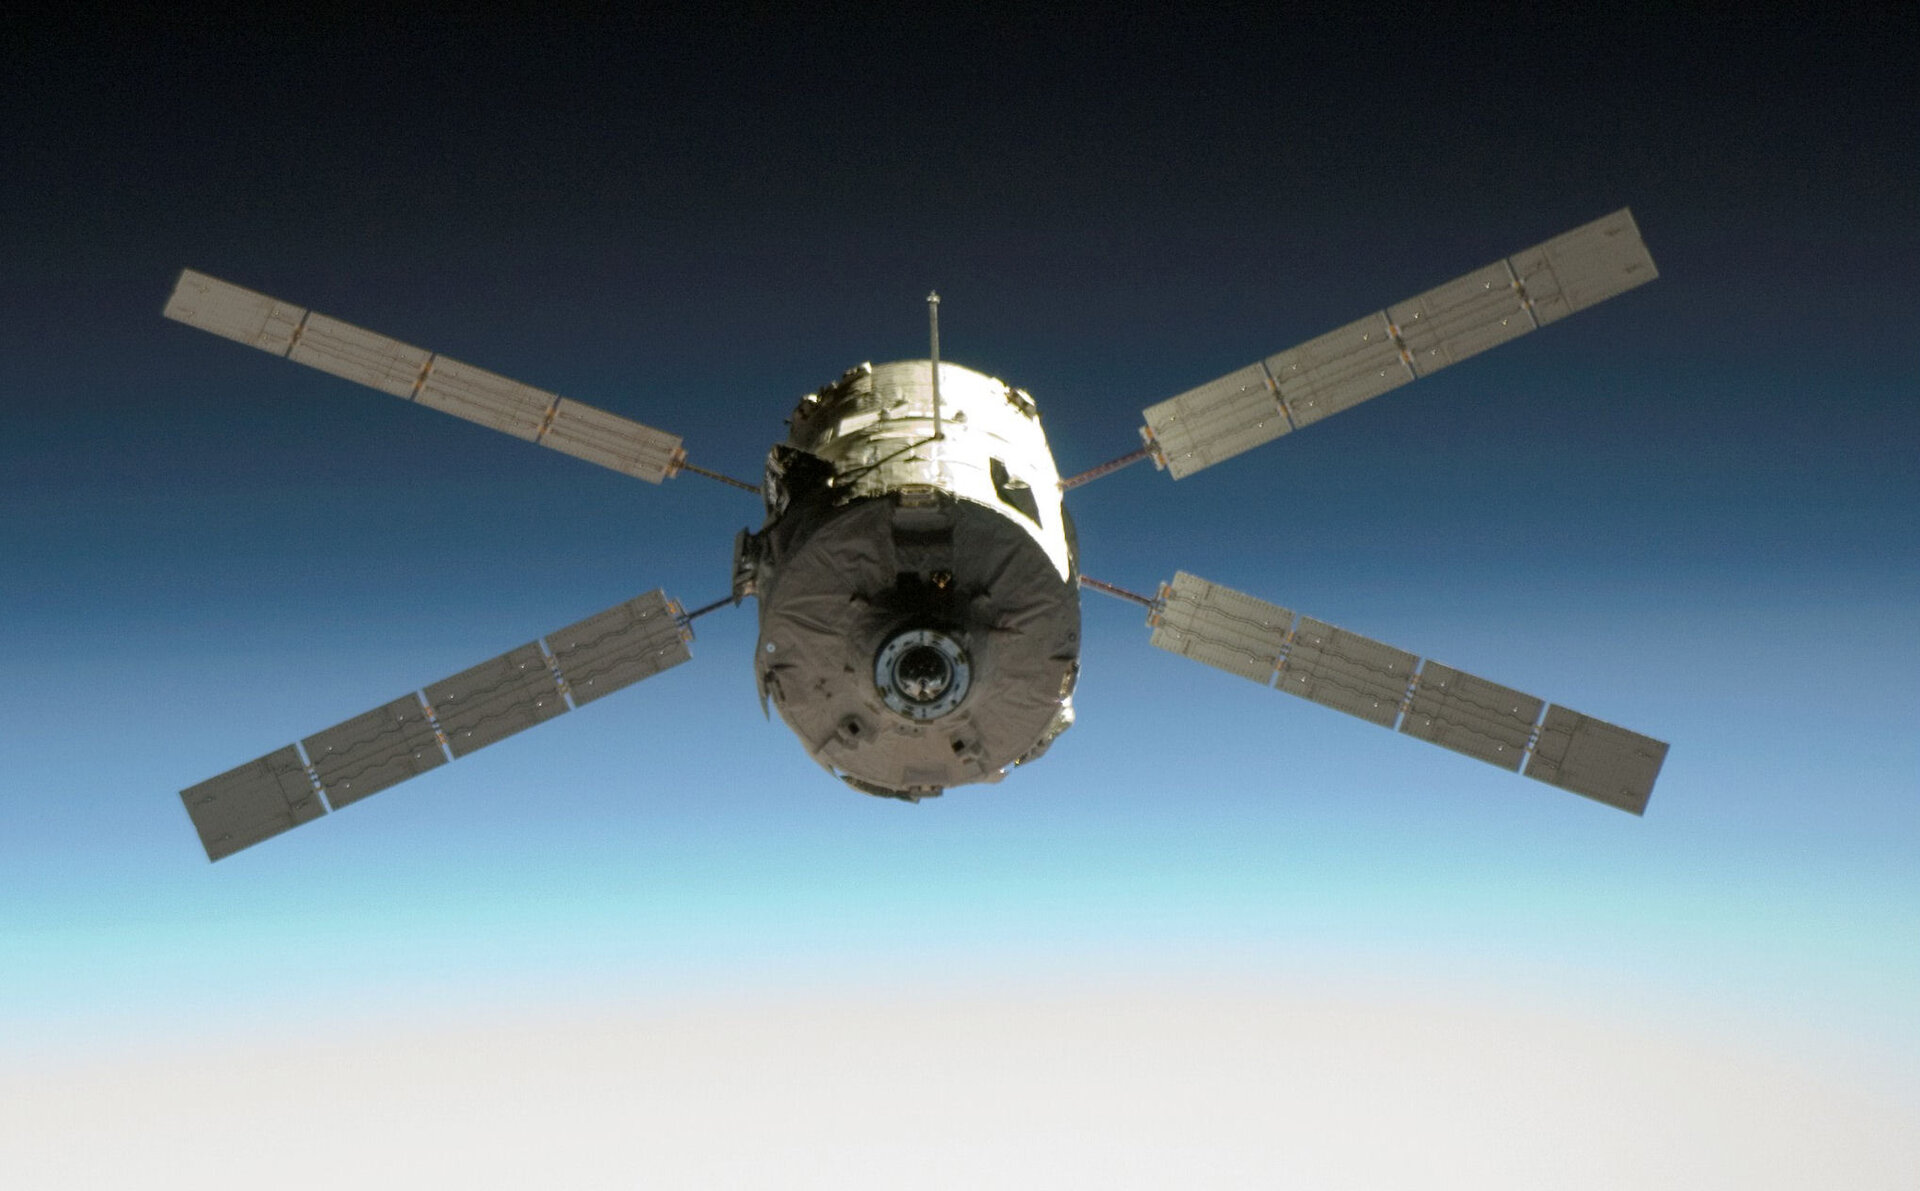 ATV-1 approaching the Station